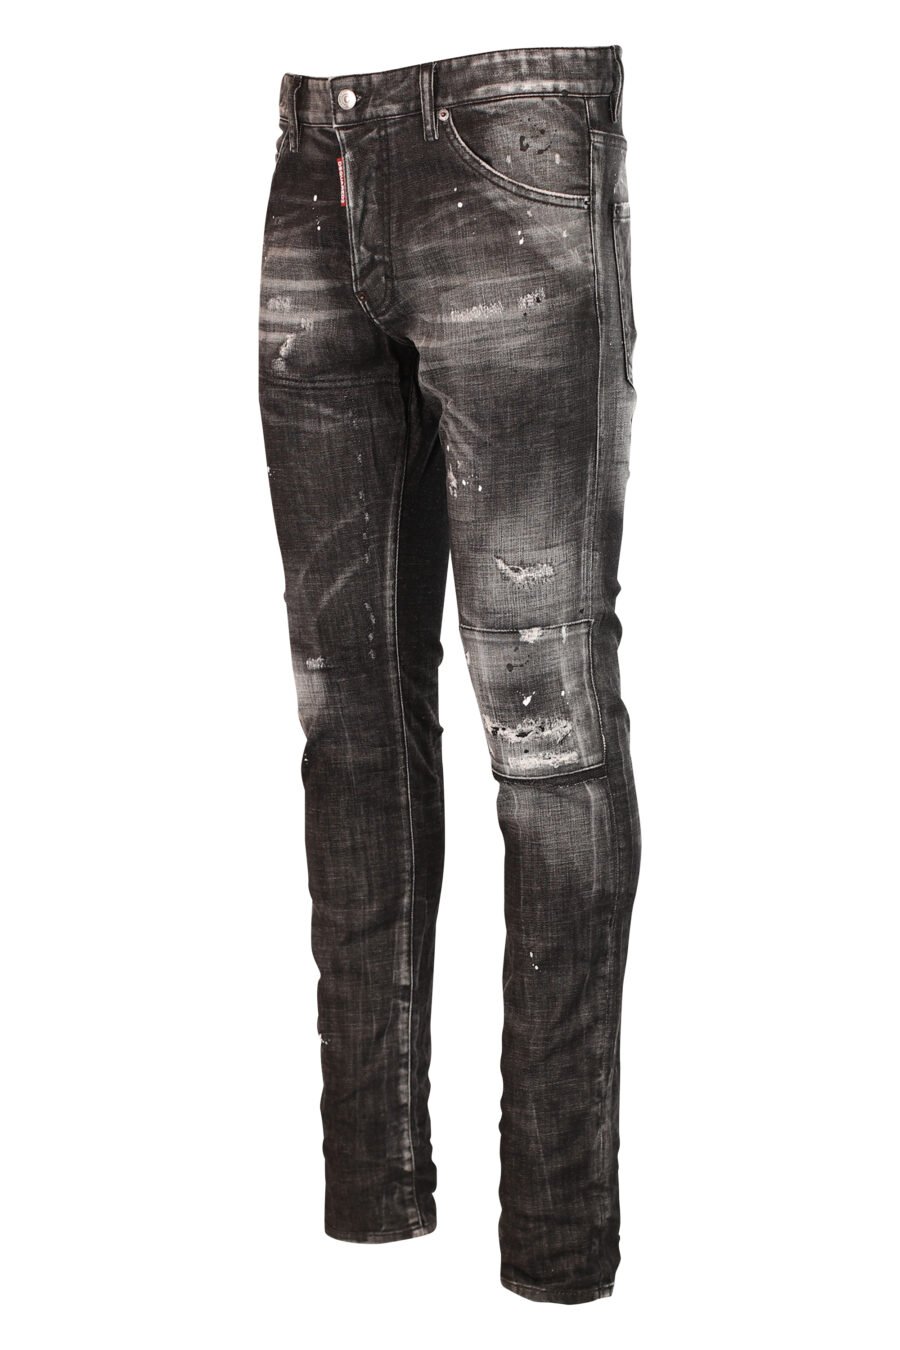 Cool guy jean trousers black semi worn and ripped - 8052134953105 2